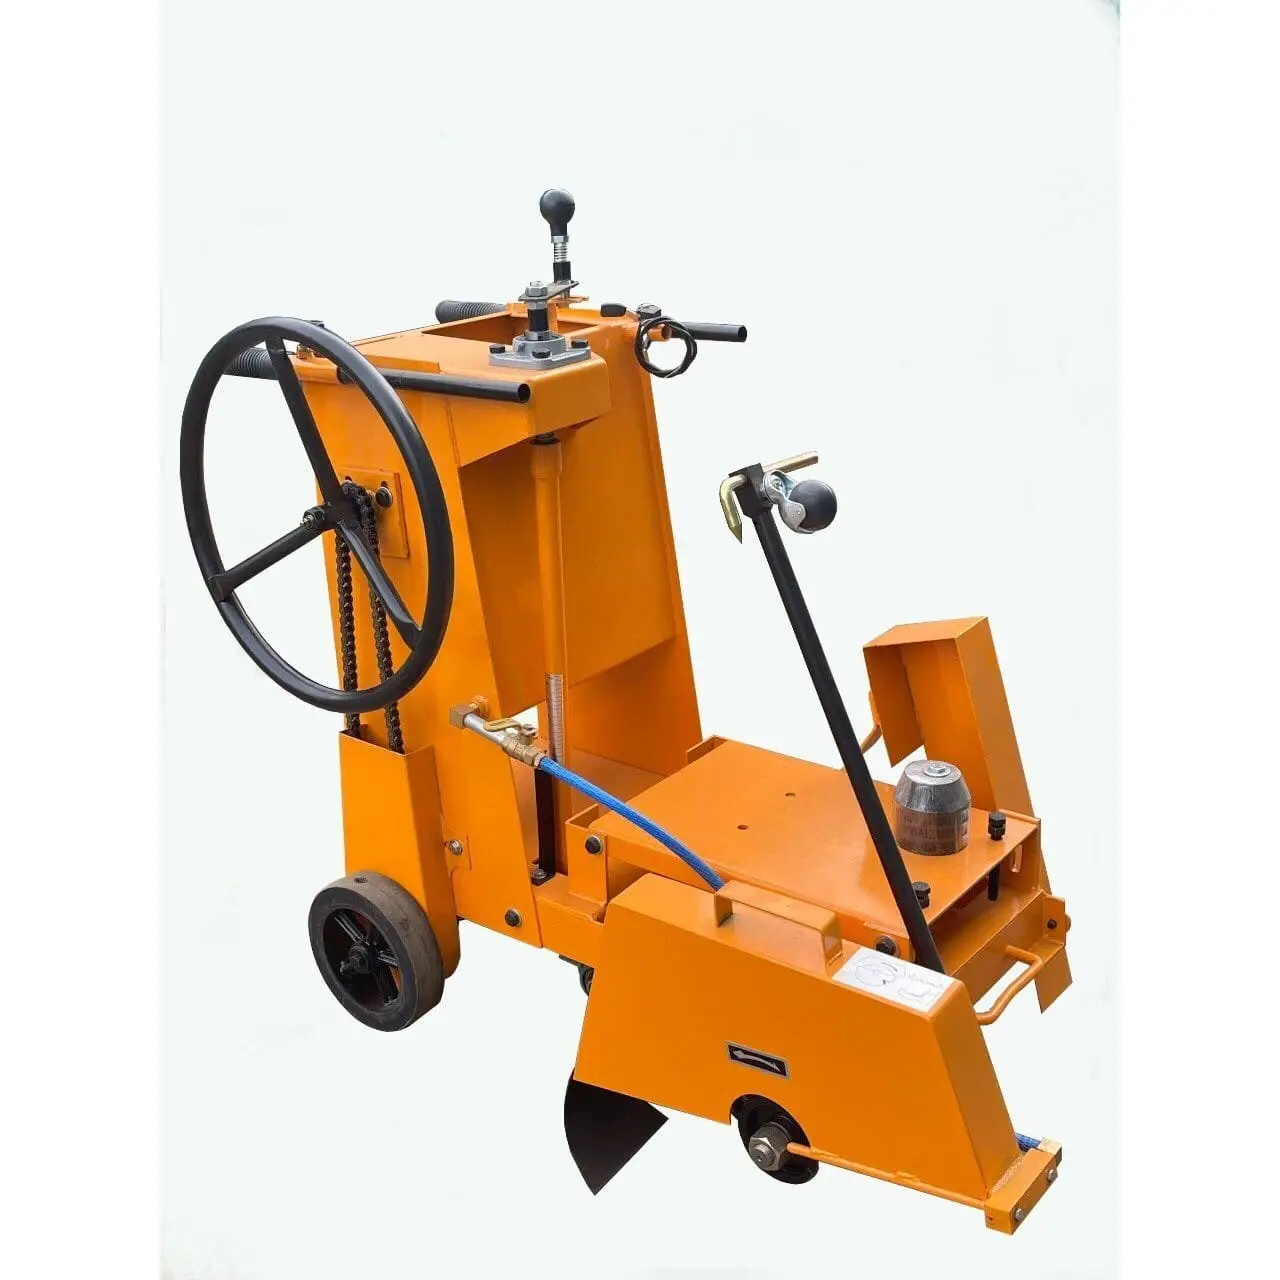 HIGH QUALITY Gasoline Concrete Saw Cutter Machine Concrete Cutting Machine Concrete Tools Construction Equipment best price